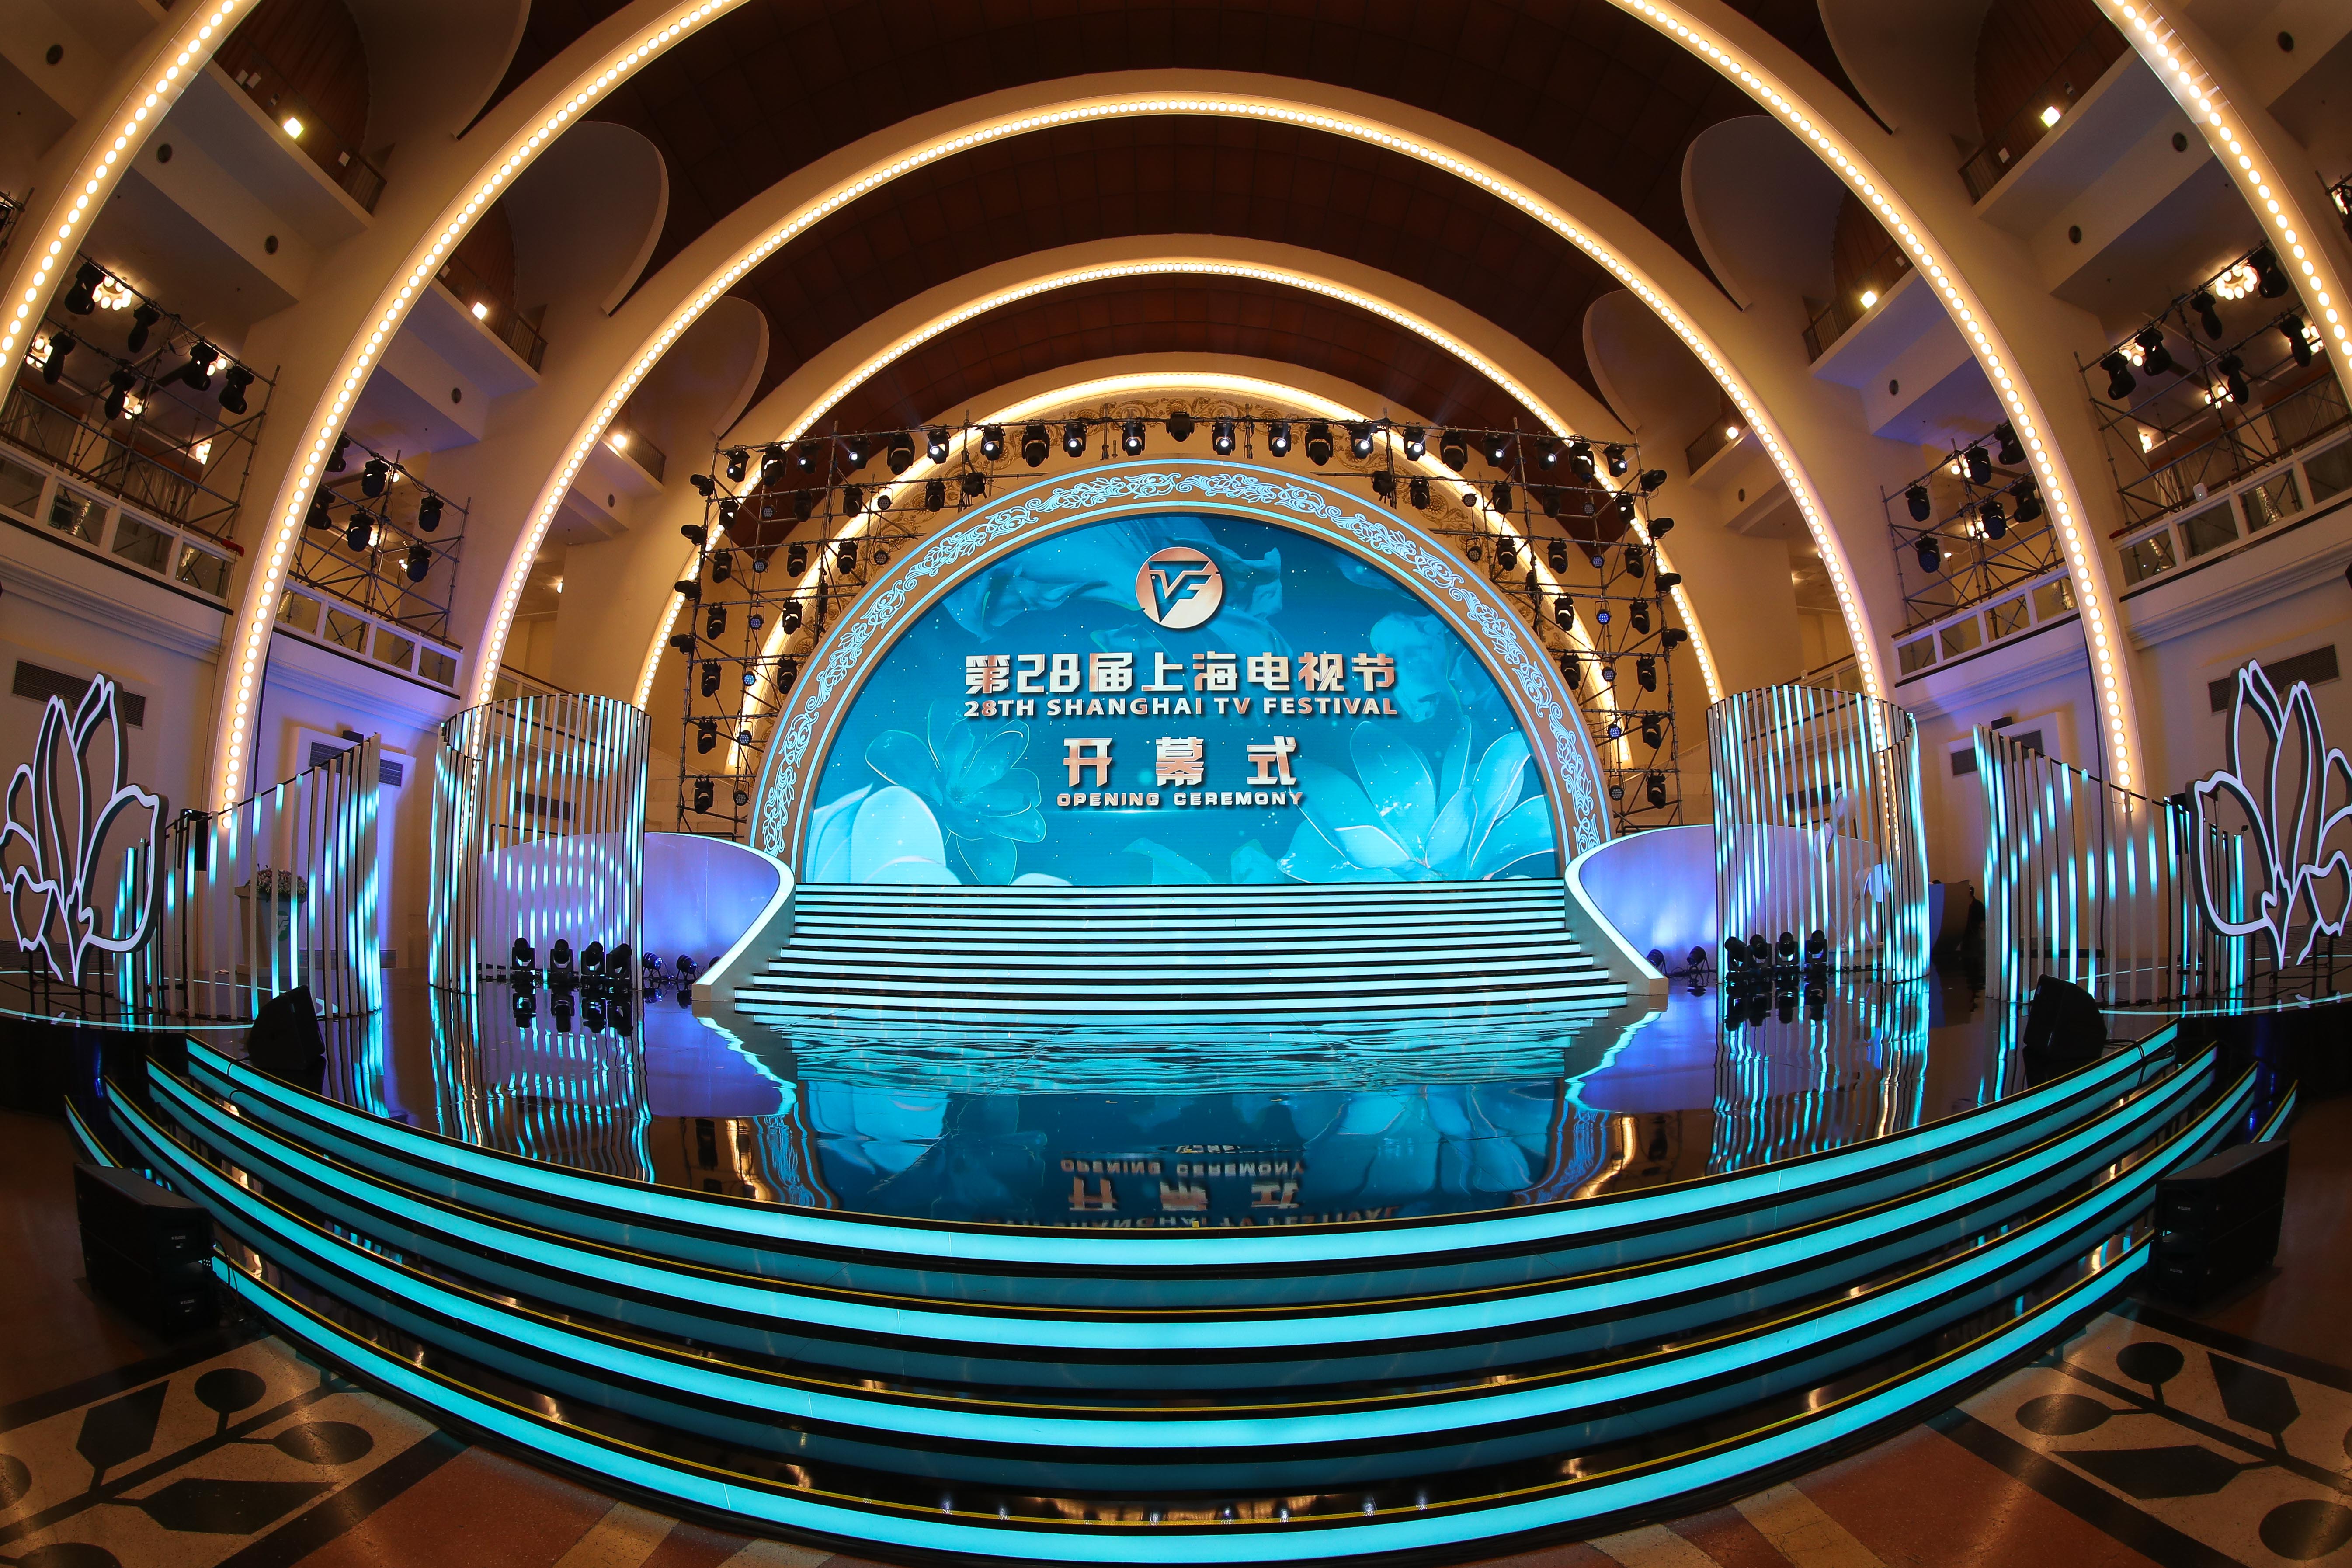 The stage is set for the opening ceremony of the 28th Shanghai TV Festival on June 19, 2023. /Shanghai TV Festival